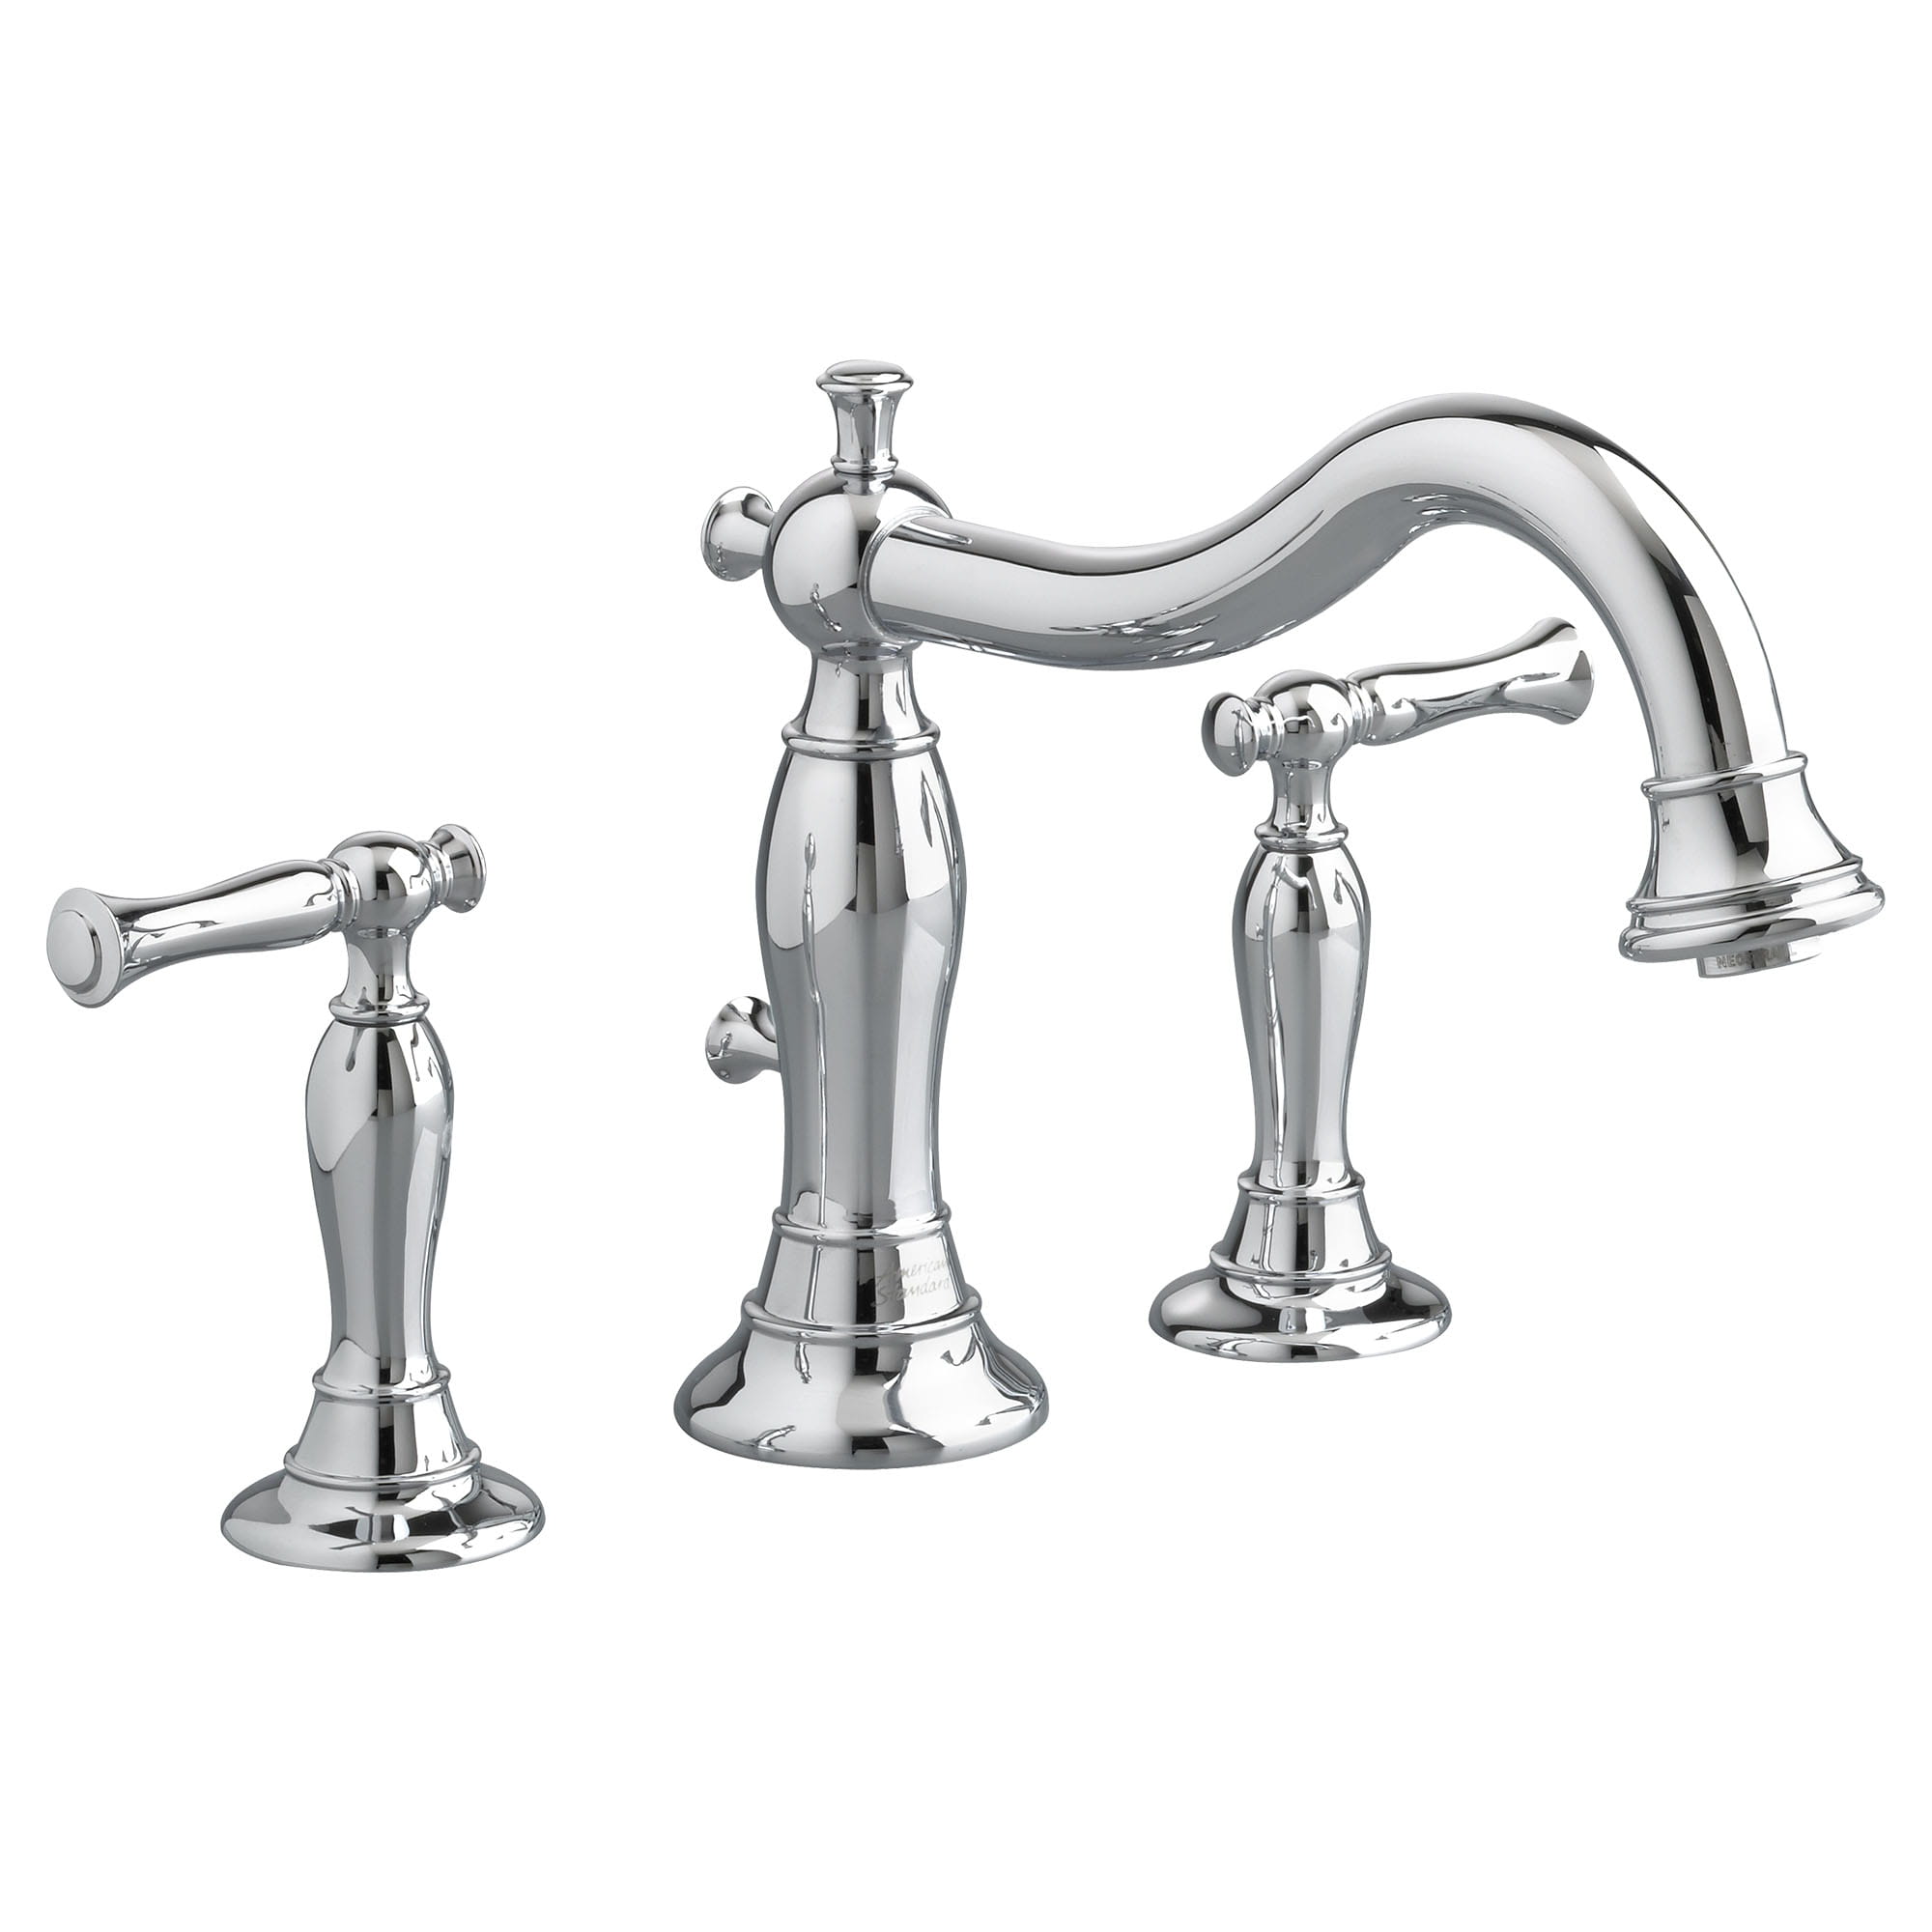 Quentin Bathtub Faucet for Flash Rough in Valve with Lever Handles CHROME